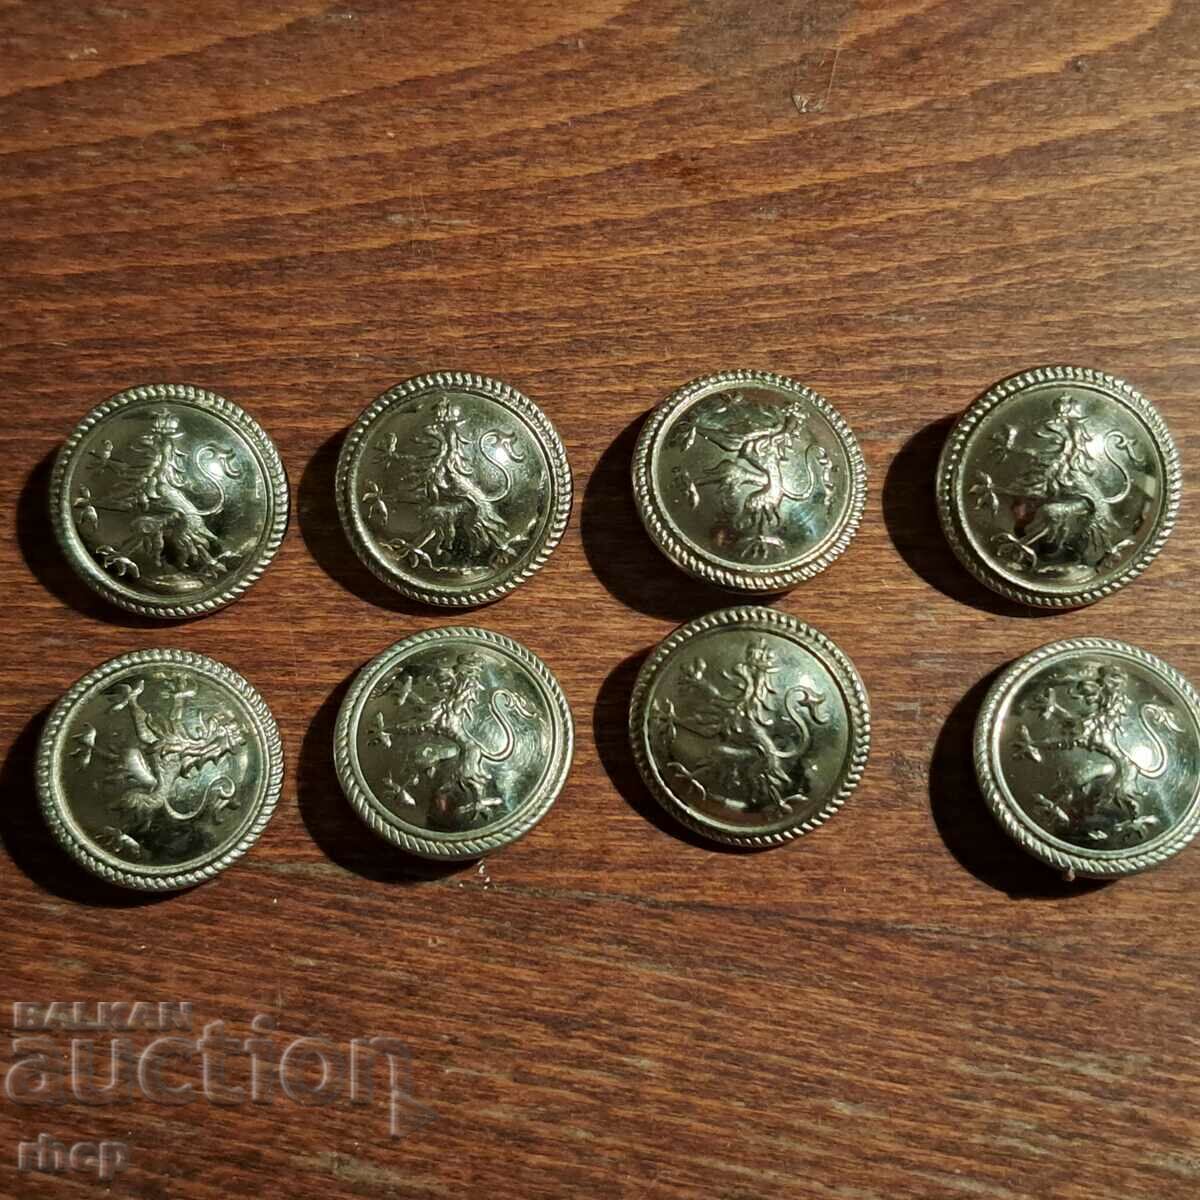 Royal Cavalry buttons for the Kingdom of Bulgaria uniform